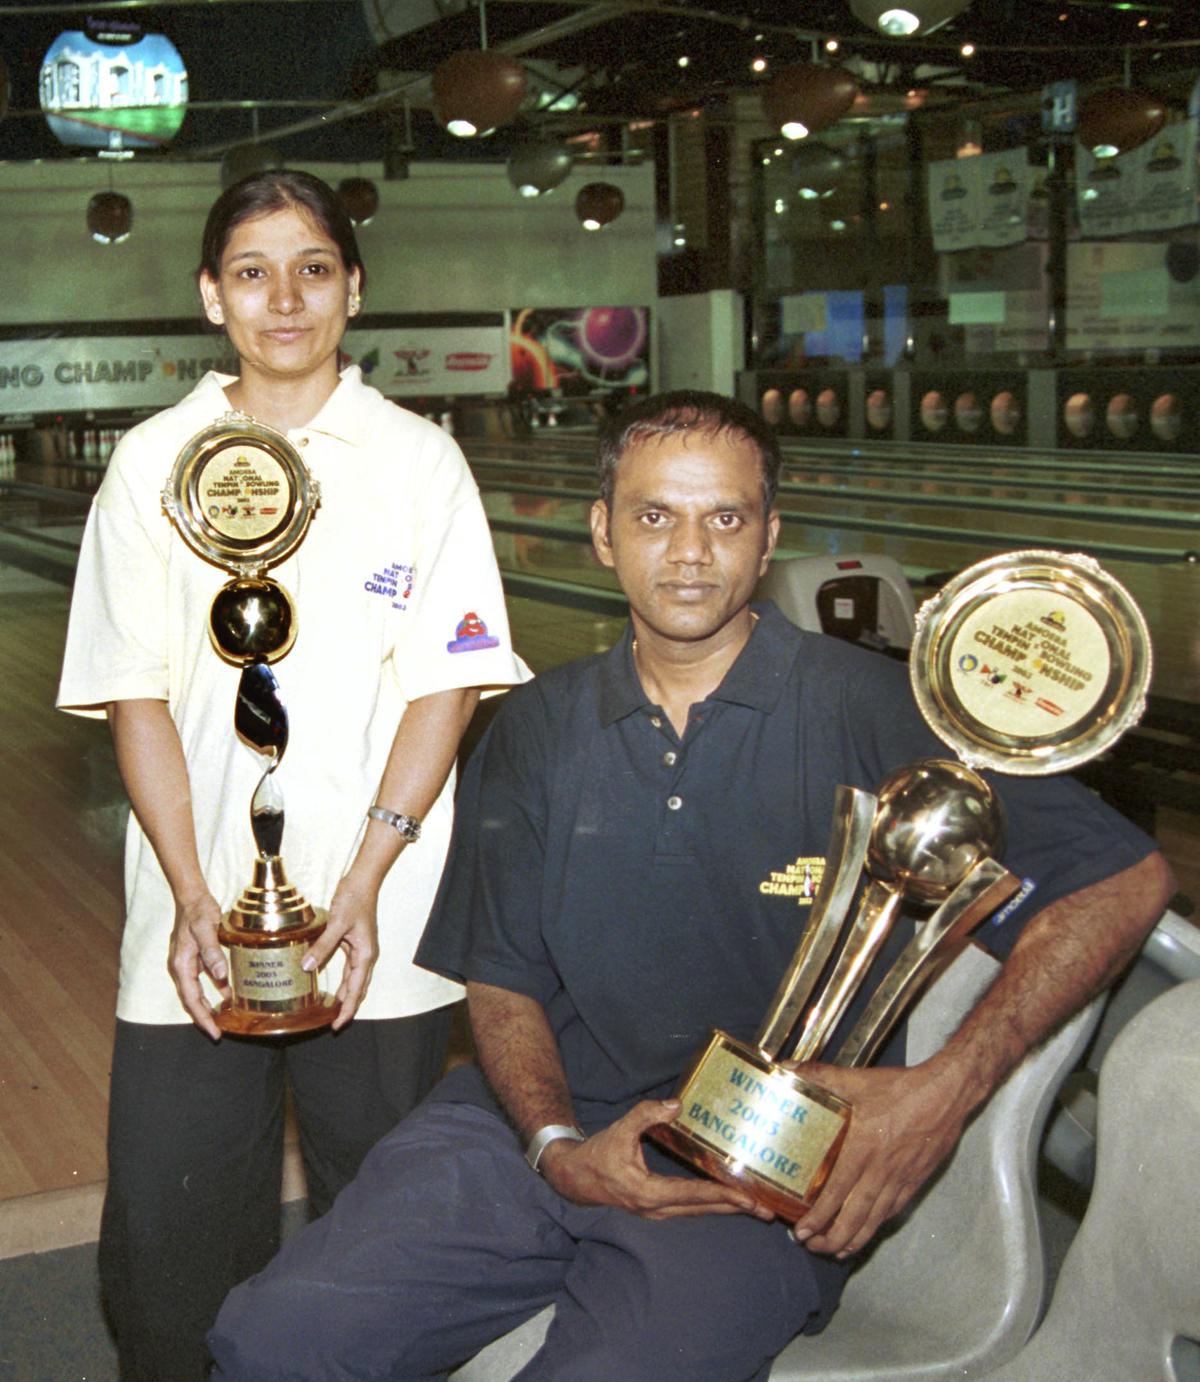 Sabeena Saleem Athica of Tamil Nadu, with Delhi’s S. Abdul Hameed, winners of the 2003 Ameoba National Tenpin Bowling Championship. 